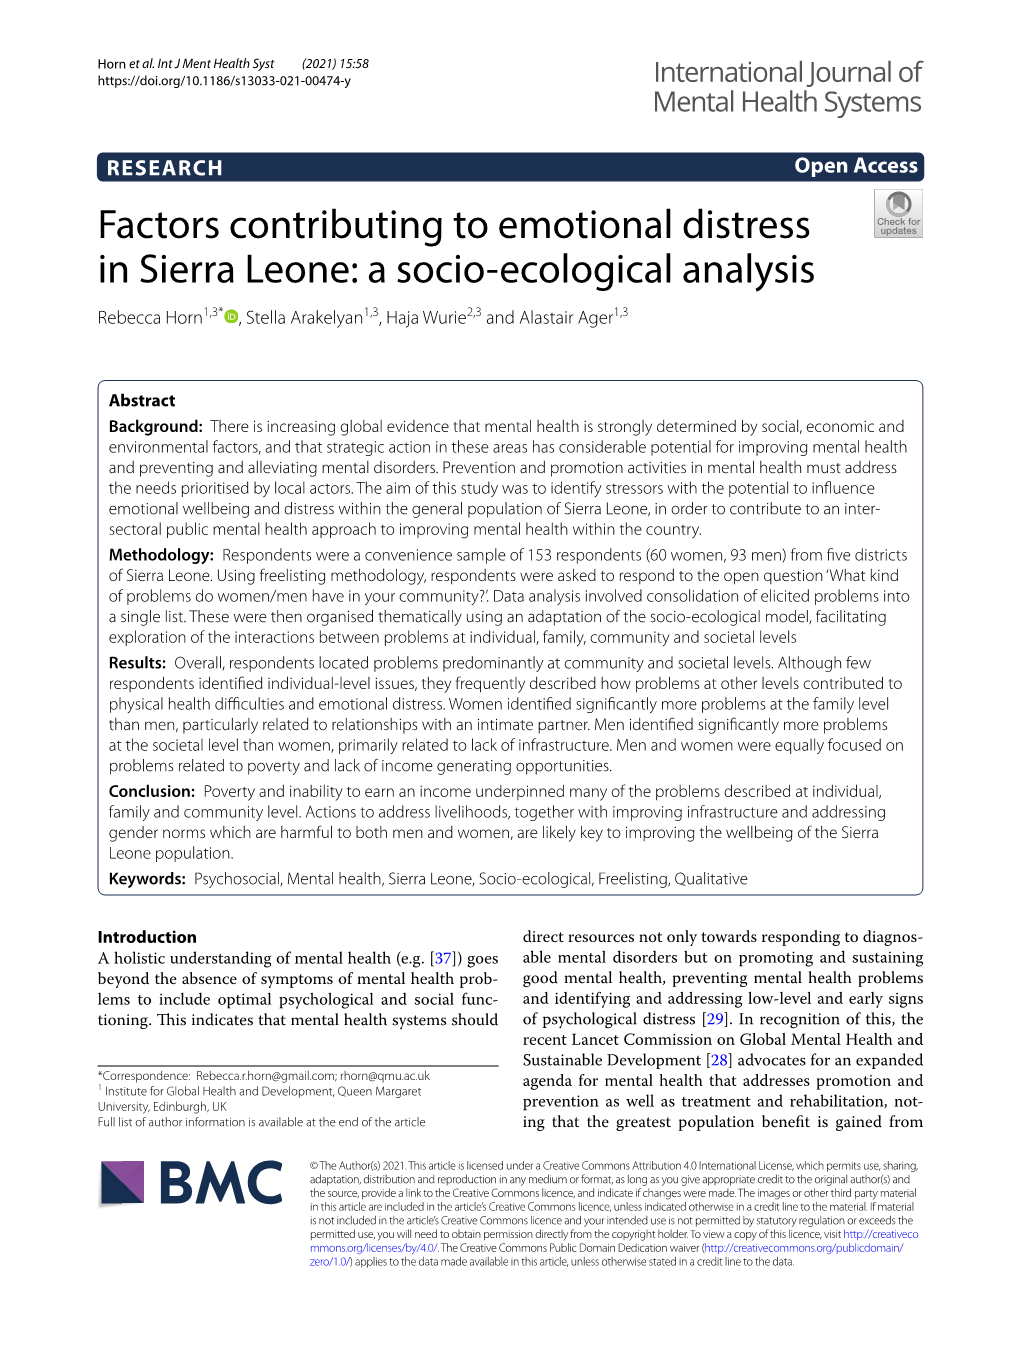 Factors Contributing to Emotional Distress in Sierra Leone: a Socio‑Ecological Analysis Rebecca Horn1,3* , Stella Arakelyan1,3, Haja Wurie2,3 and Alastair Ager1,3